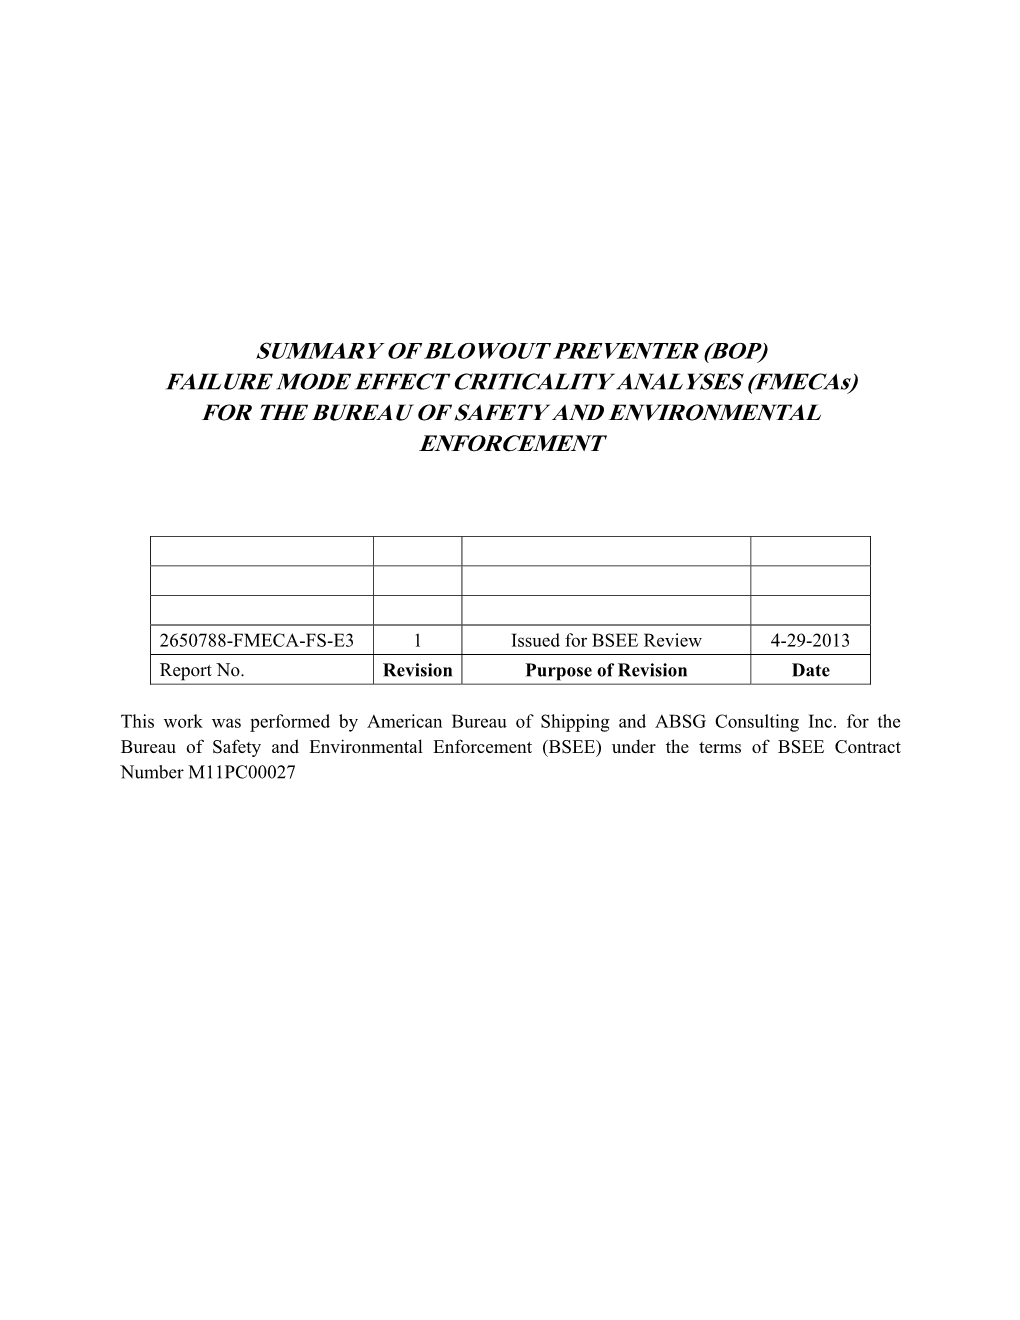 SUMMARY of BLOWOUT PREVENTER (BOP) FAILURE MODE EFFECT CRITICALITY ANALYSES (Fmecas) for the BUREAU of SAFETY and ENVIRONMENTAL ENFORCEMENT